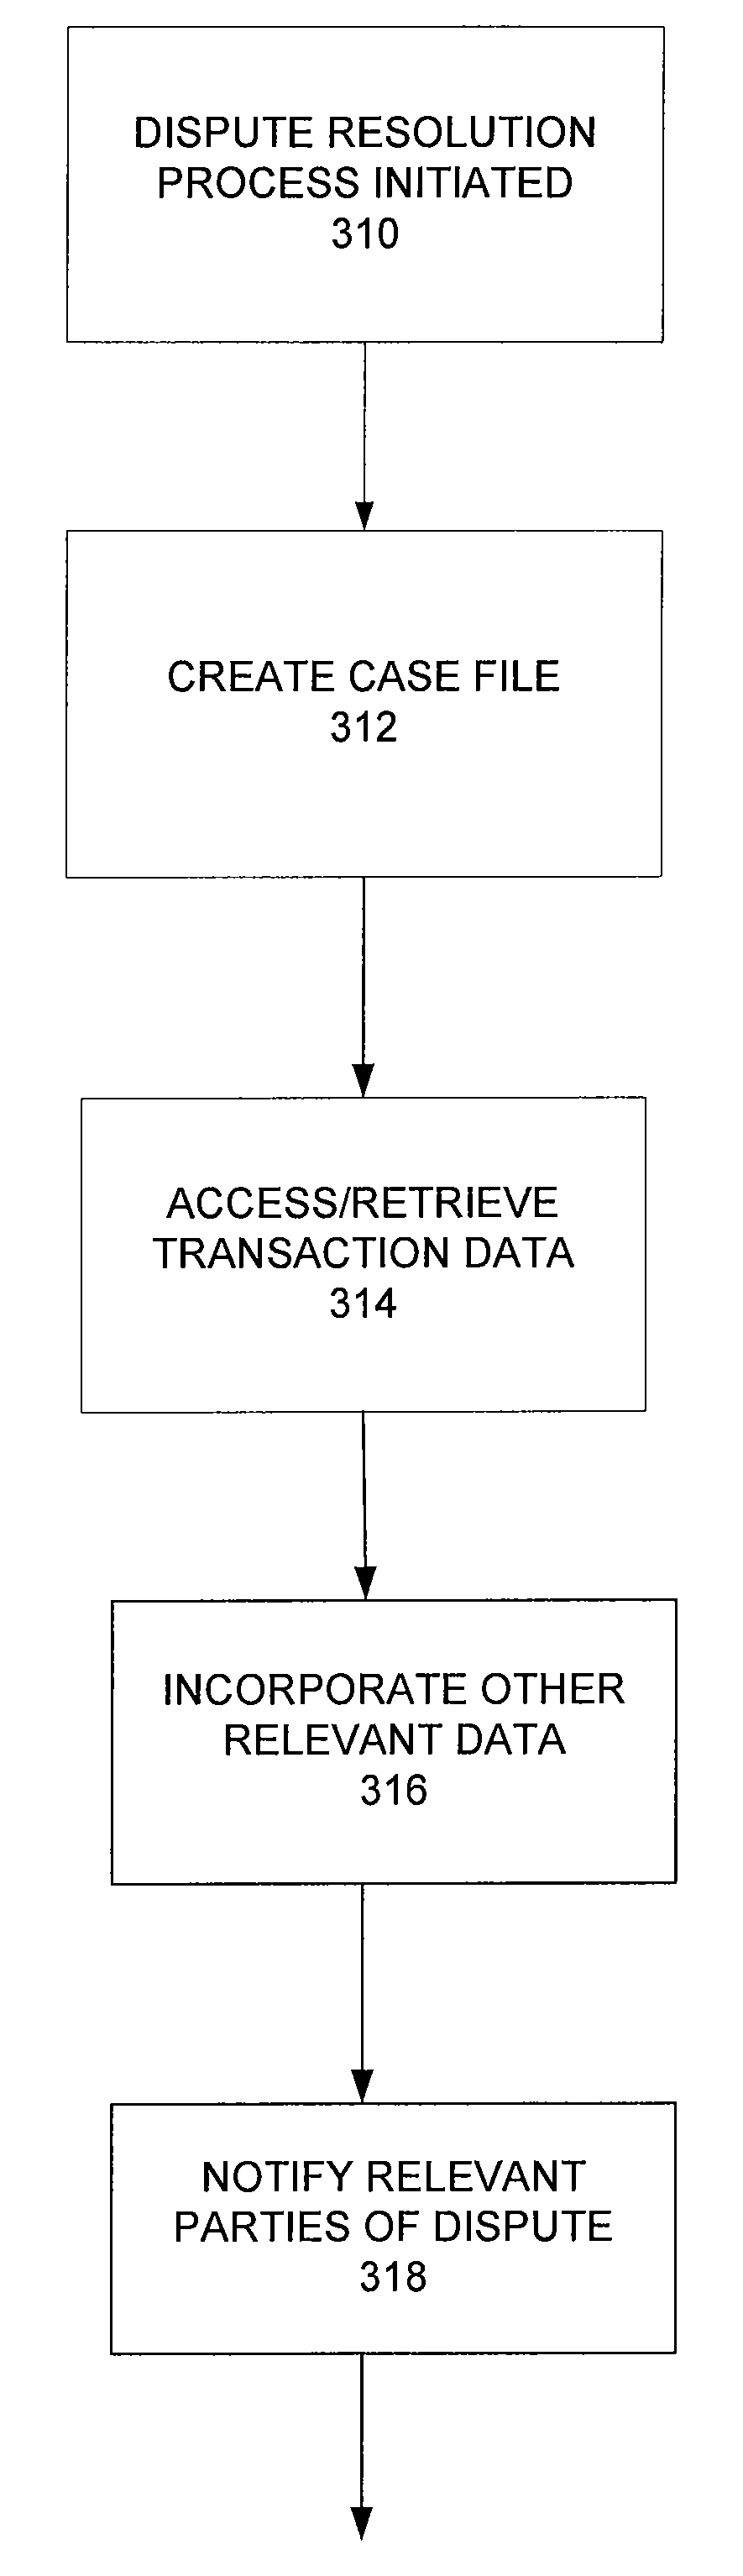 Centralized dispute resolution system for commercial transactions